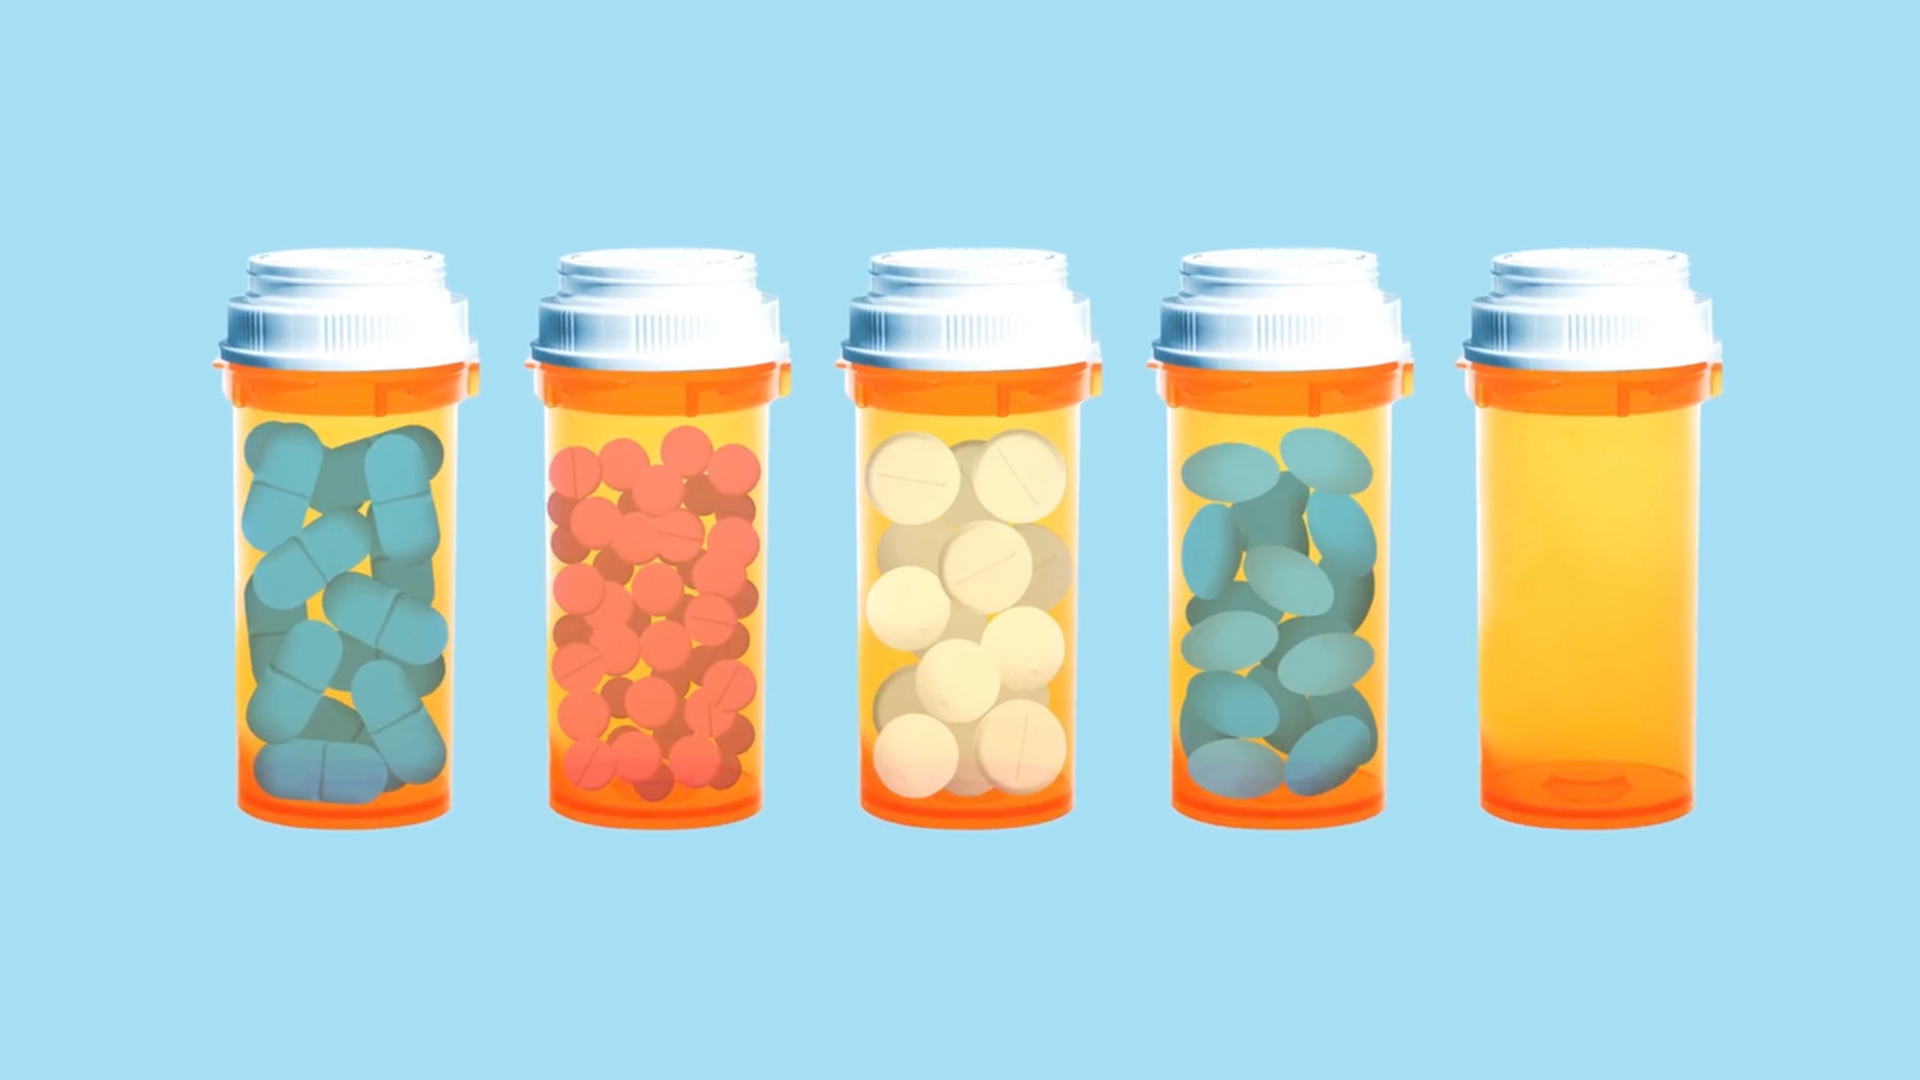 Illustration taken from the video of medicine bottles filled with pills